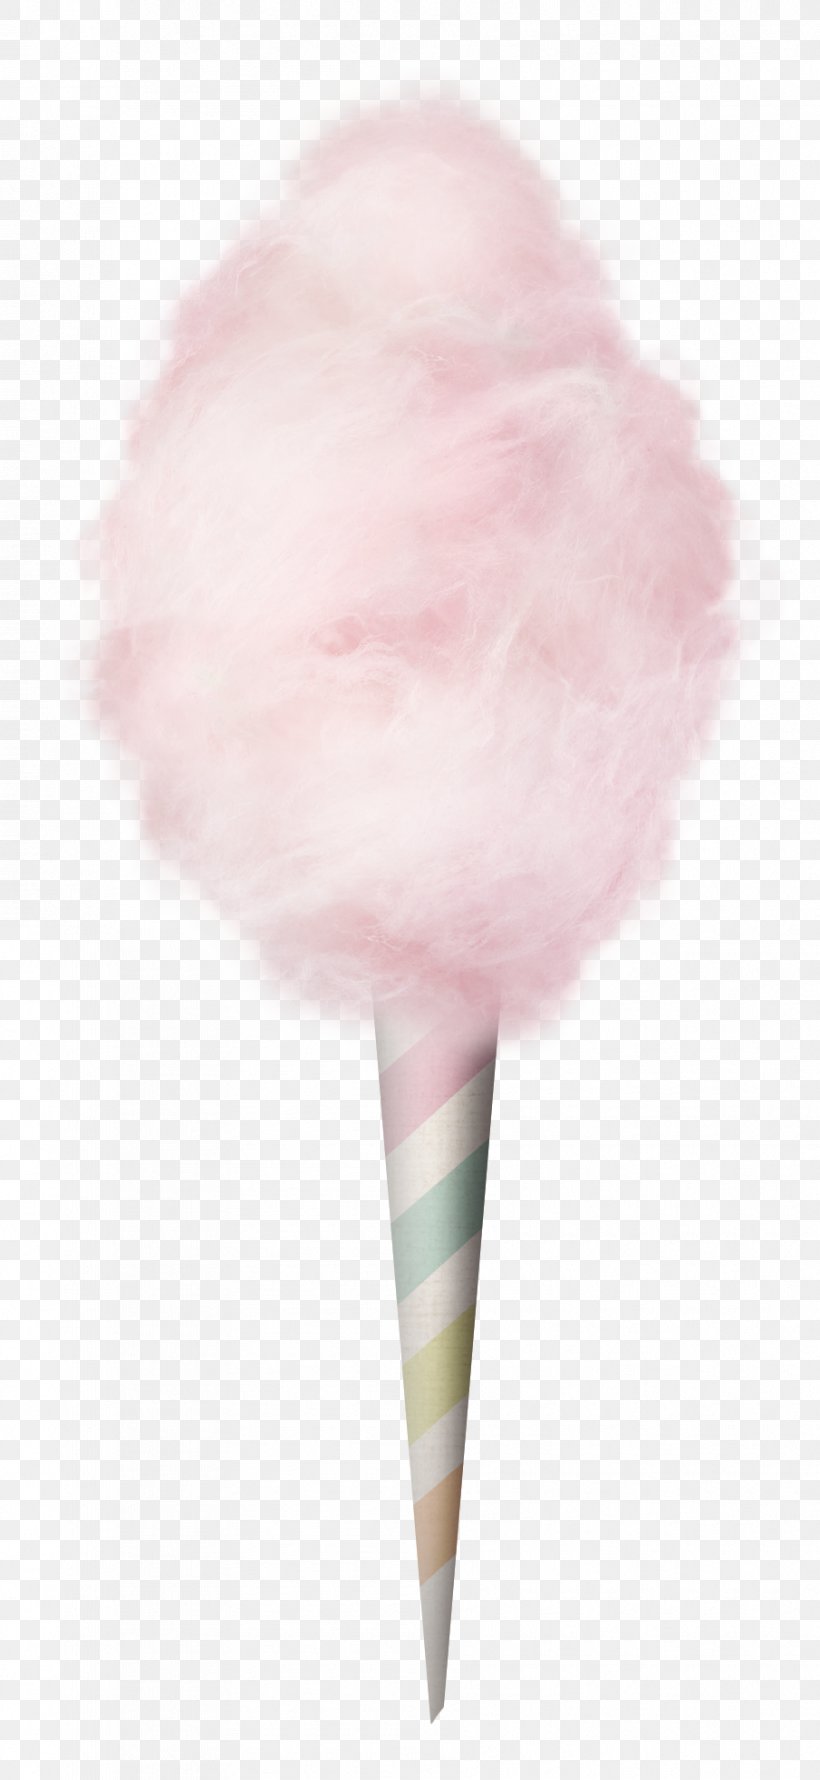 Ice Cream Cone Pink Sweetness, PNG, 905x1965px, Ice Cream, Cream, Ice Cream Cone, Ice Cream Cones, Petal Download Free